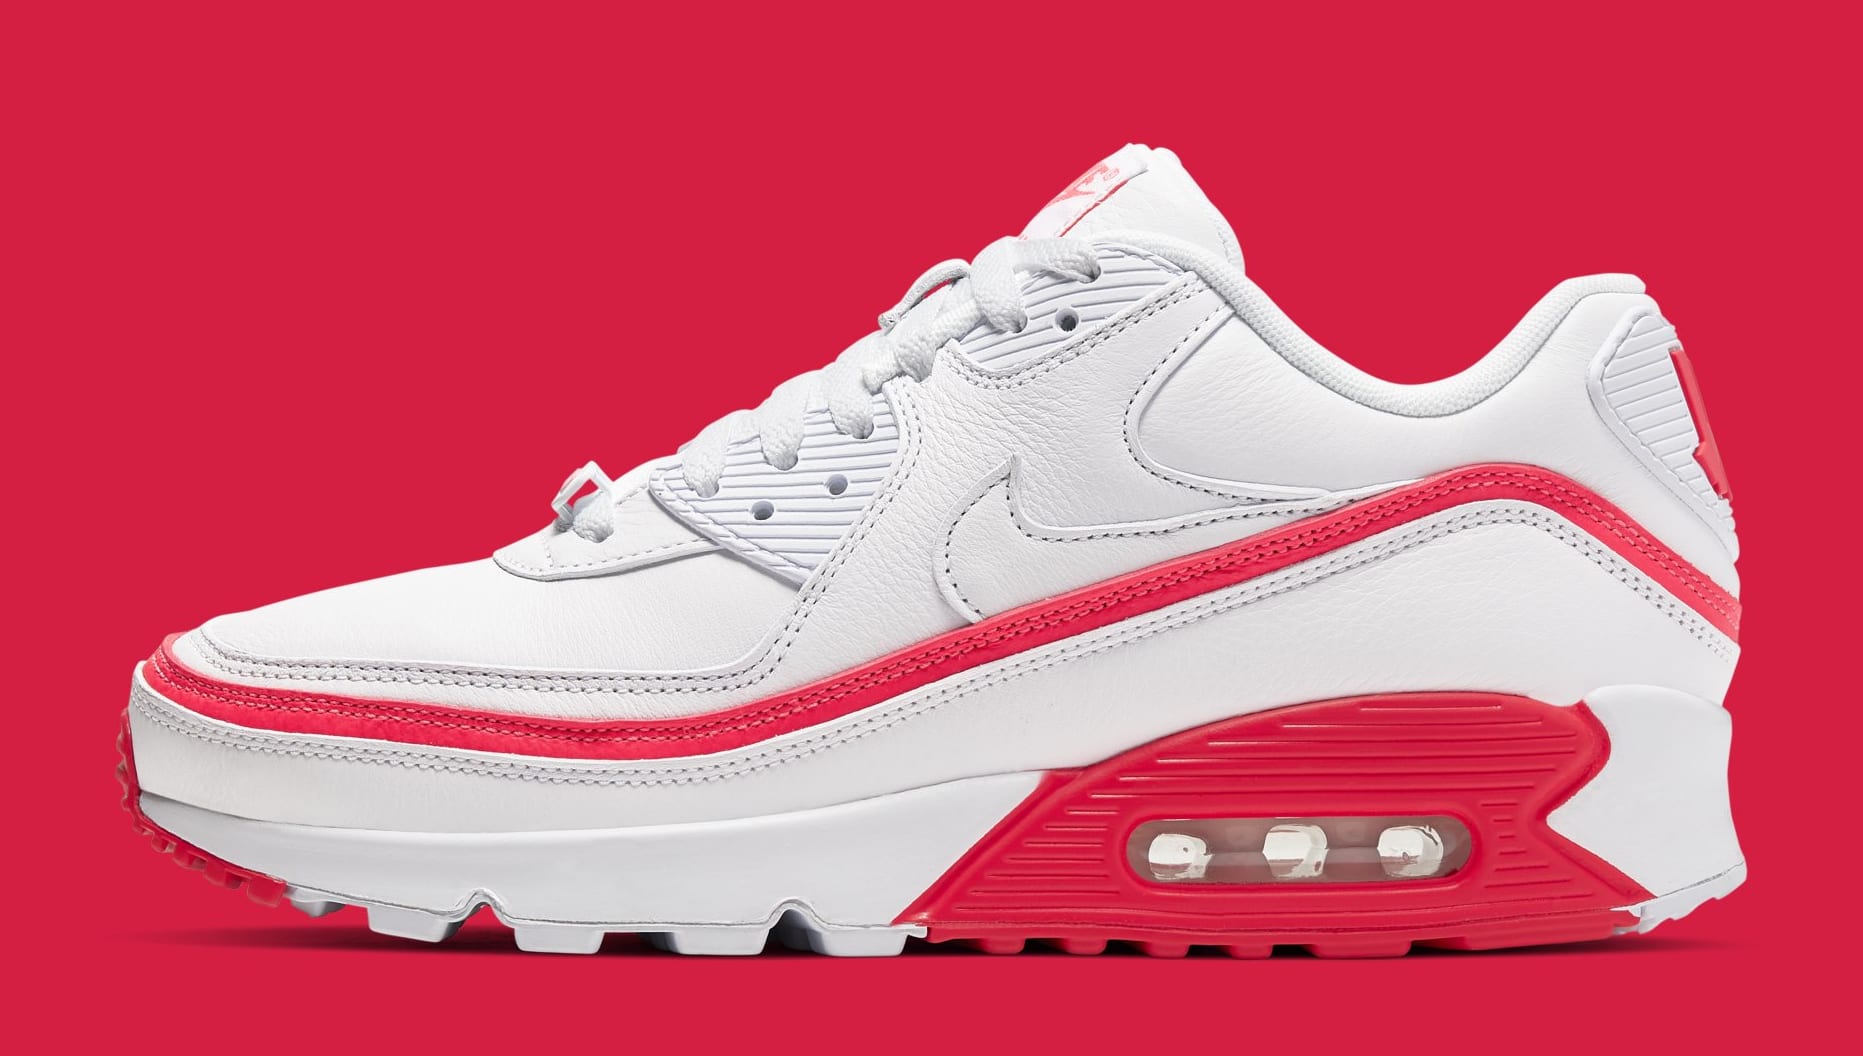 undefeated-nike-air-max-90-white-solar-red-cj7197-103-lateral